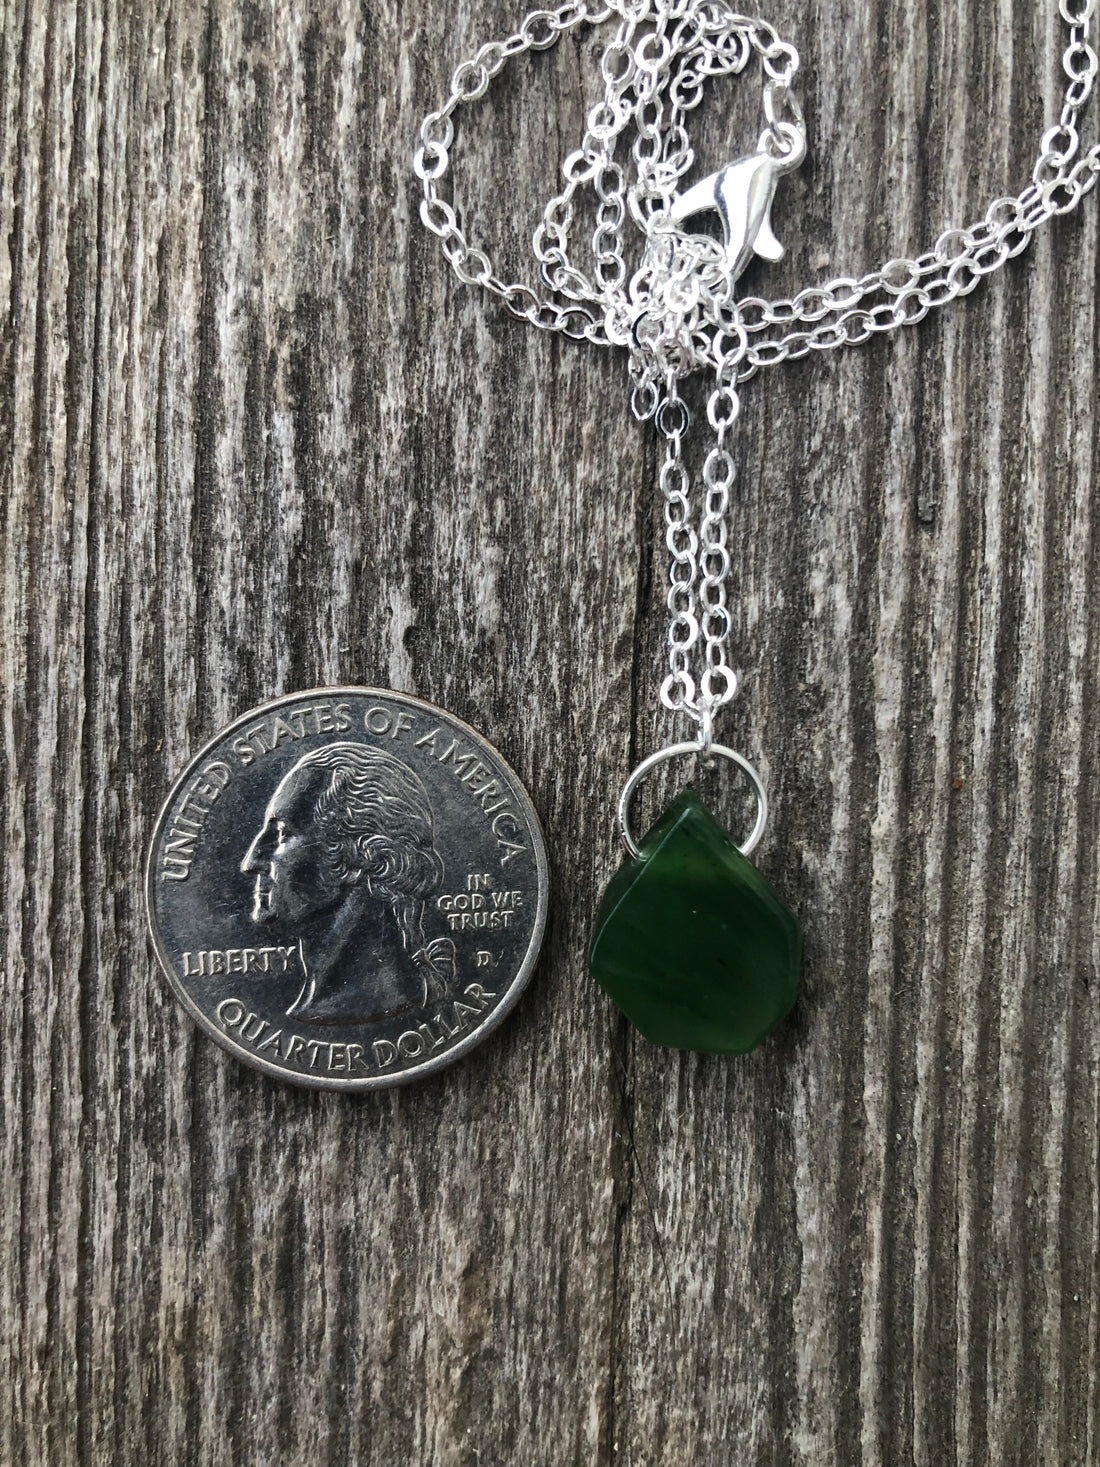 Canadian Jade For Protection, Self-Confidence and Awareness. Pewter Accent Piece.